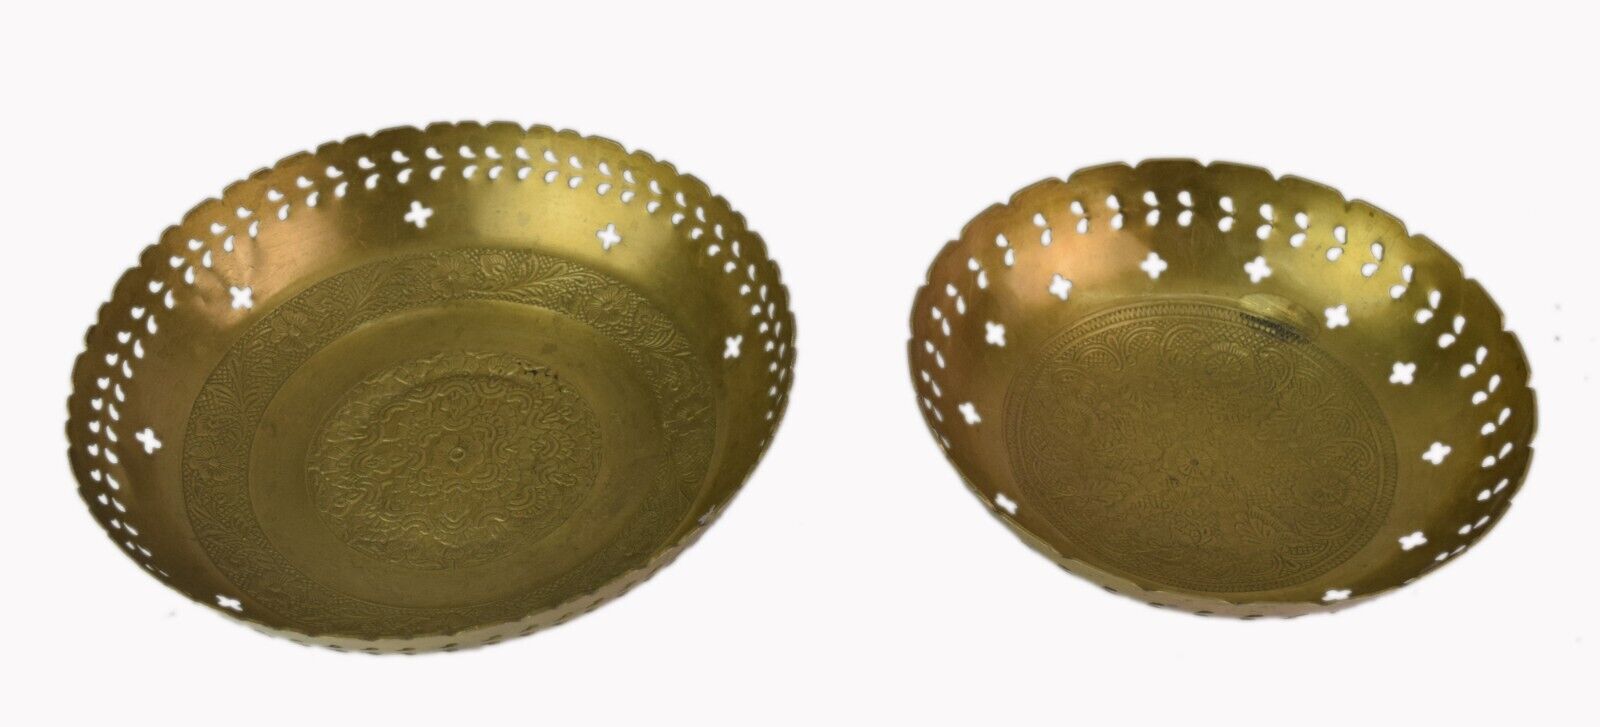 Two Handcrafted Old Brass Fruit Baskets Dining Table Decoration Bowls G66-1225